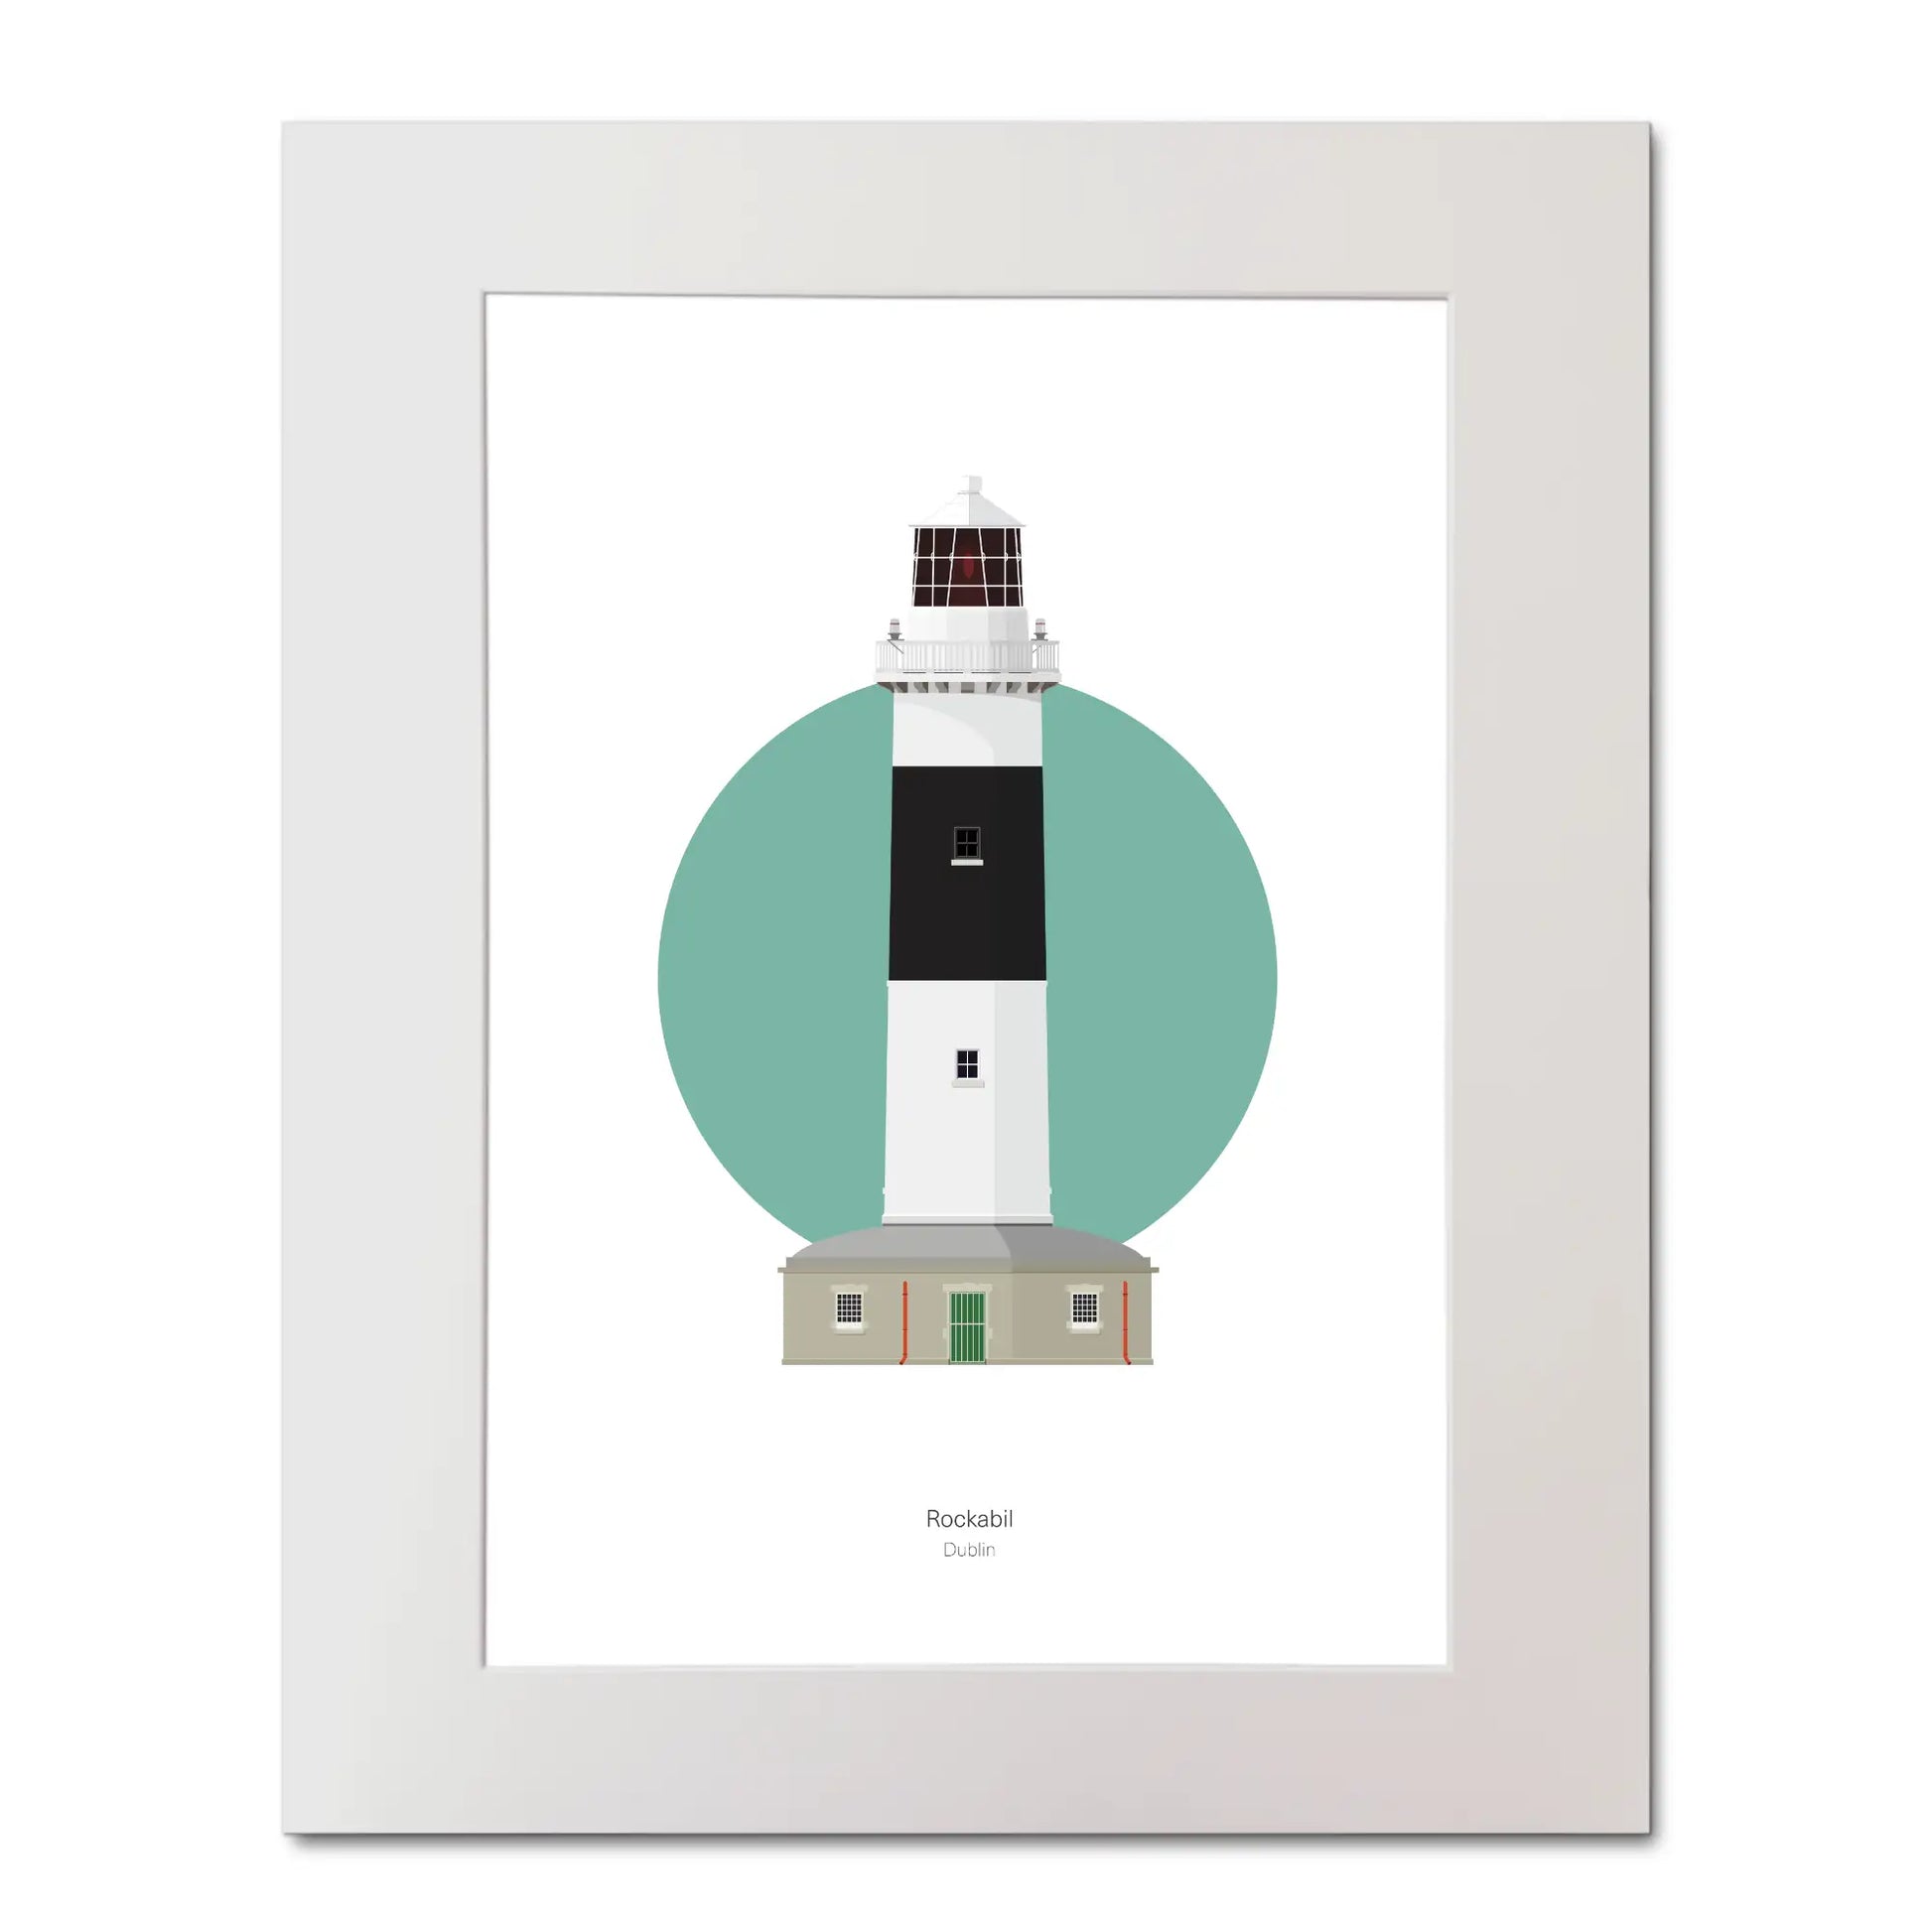 Illustration of Rockabill lighthouse on a white background inside light blue square, mounted and measuring 40x50cm.